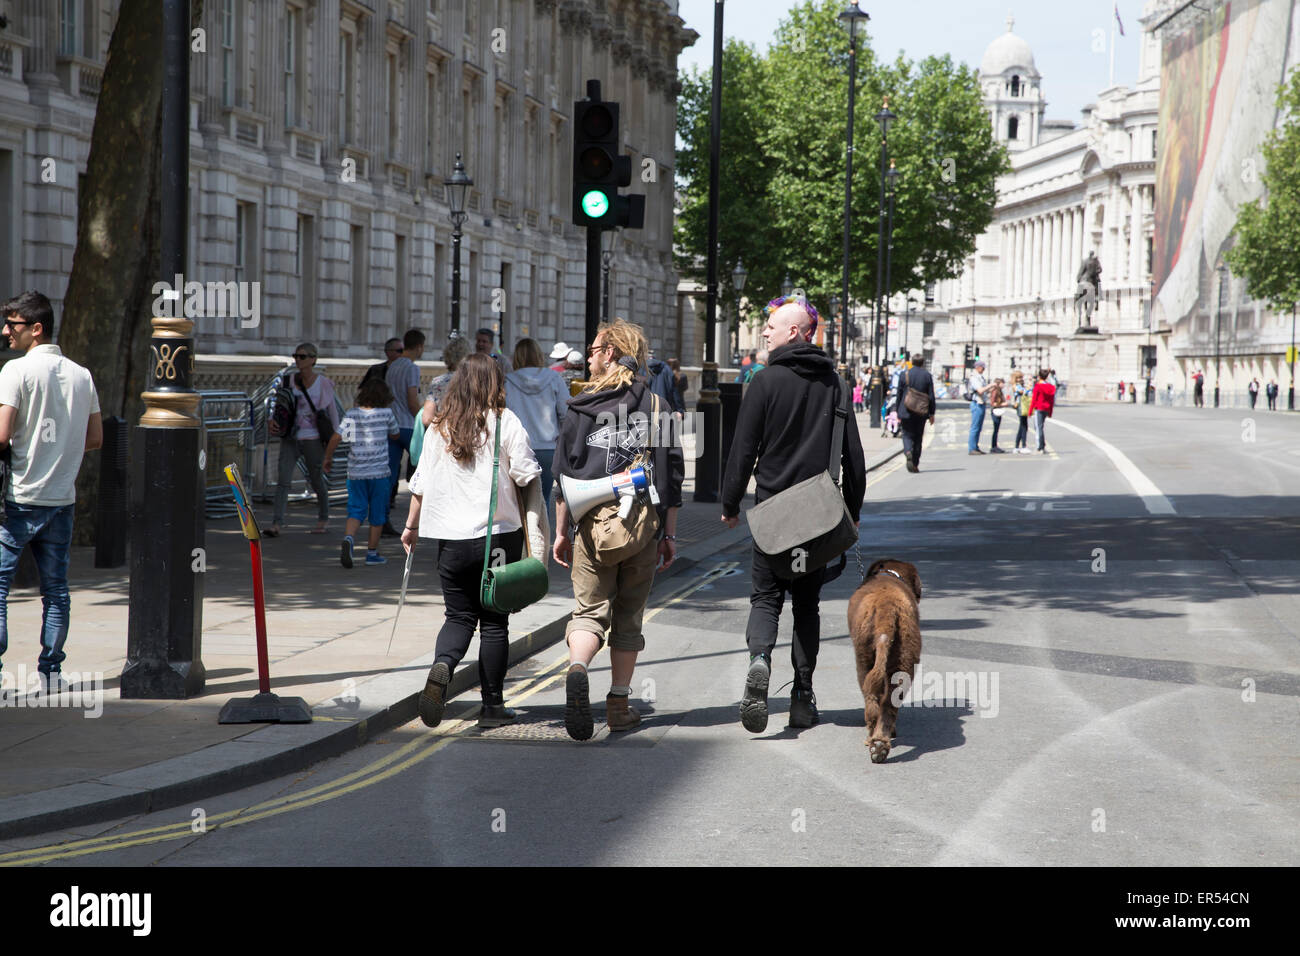 London,UK,27th May 2015,Visitors walk up Whitehall with a loud hailer in Londo Credit: Keith Larby/Alamy Live News Stock Photo